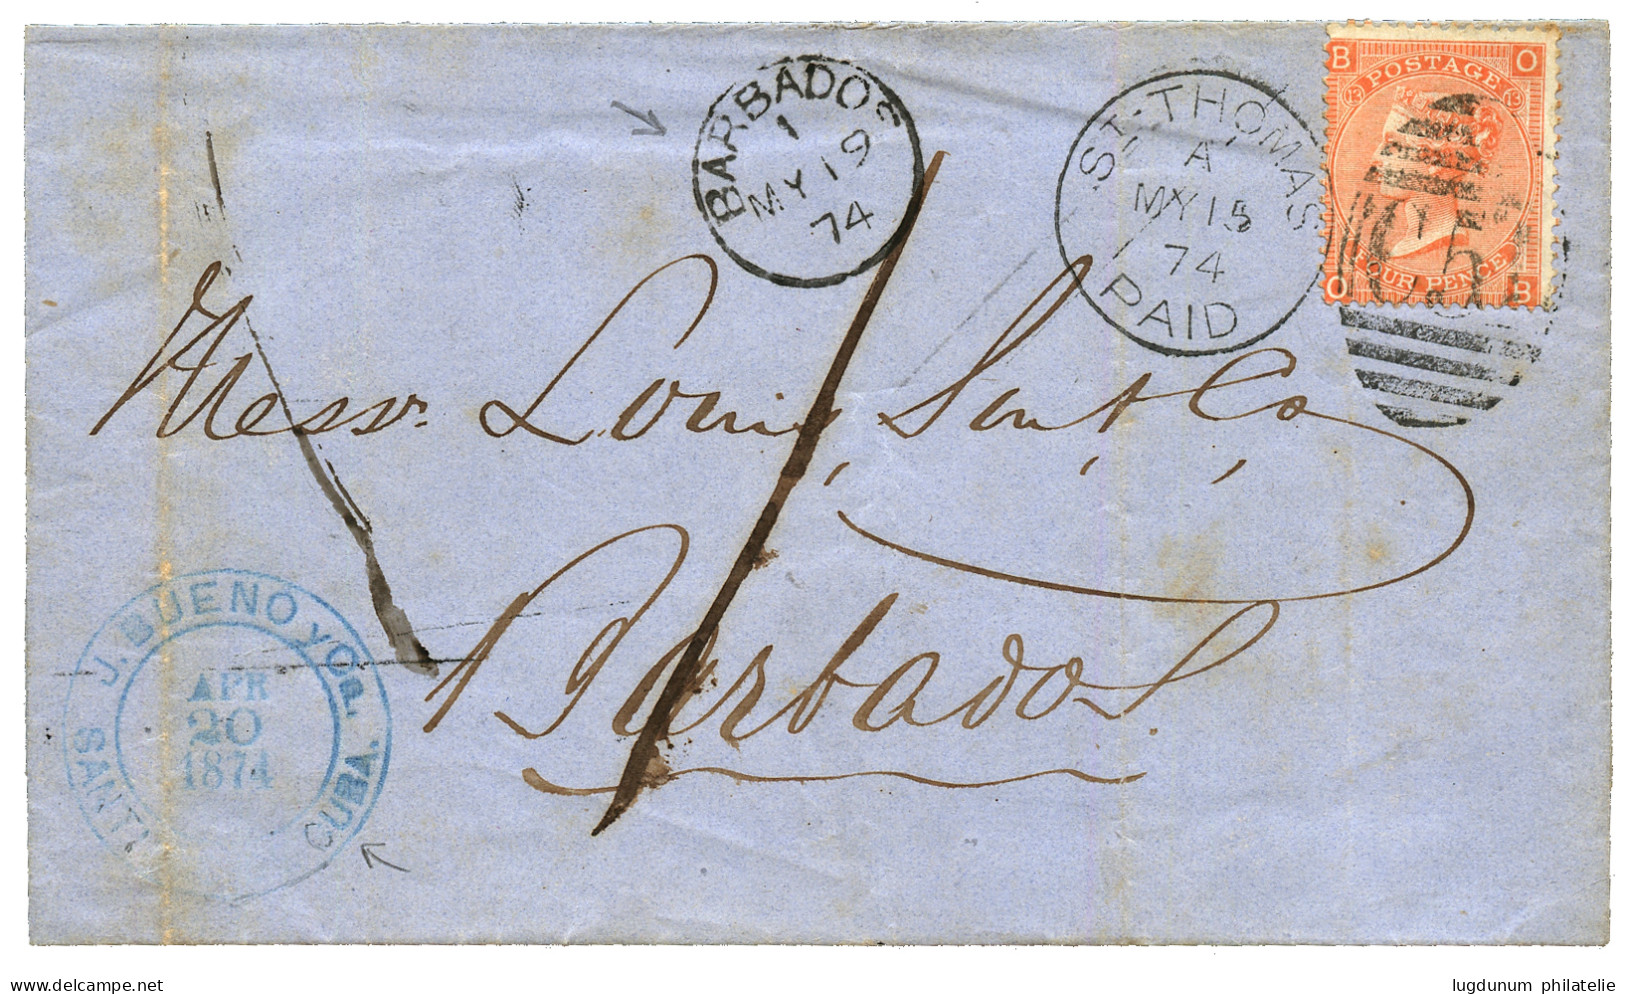 "CUBA Via DANISH WEST INDIES To BARBADOS" : 1874 4d Canc. C51 + ST THOMAS PAID + "1" Tax Marking + BARBADOS Cds On Cover - Denmark (West Indies)